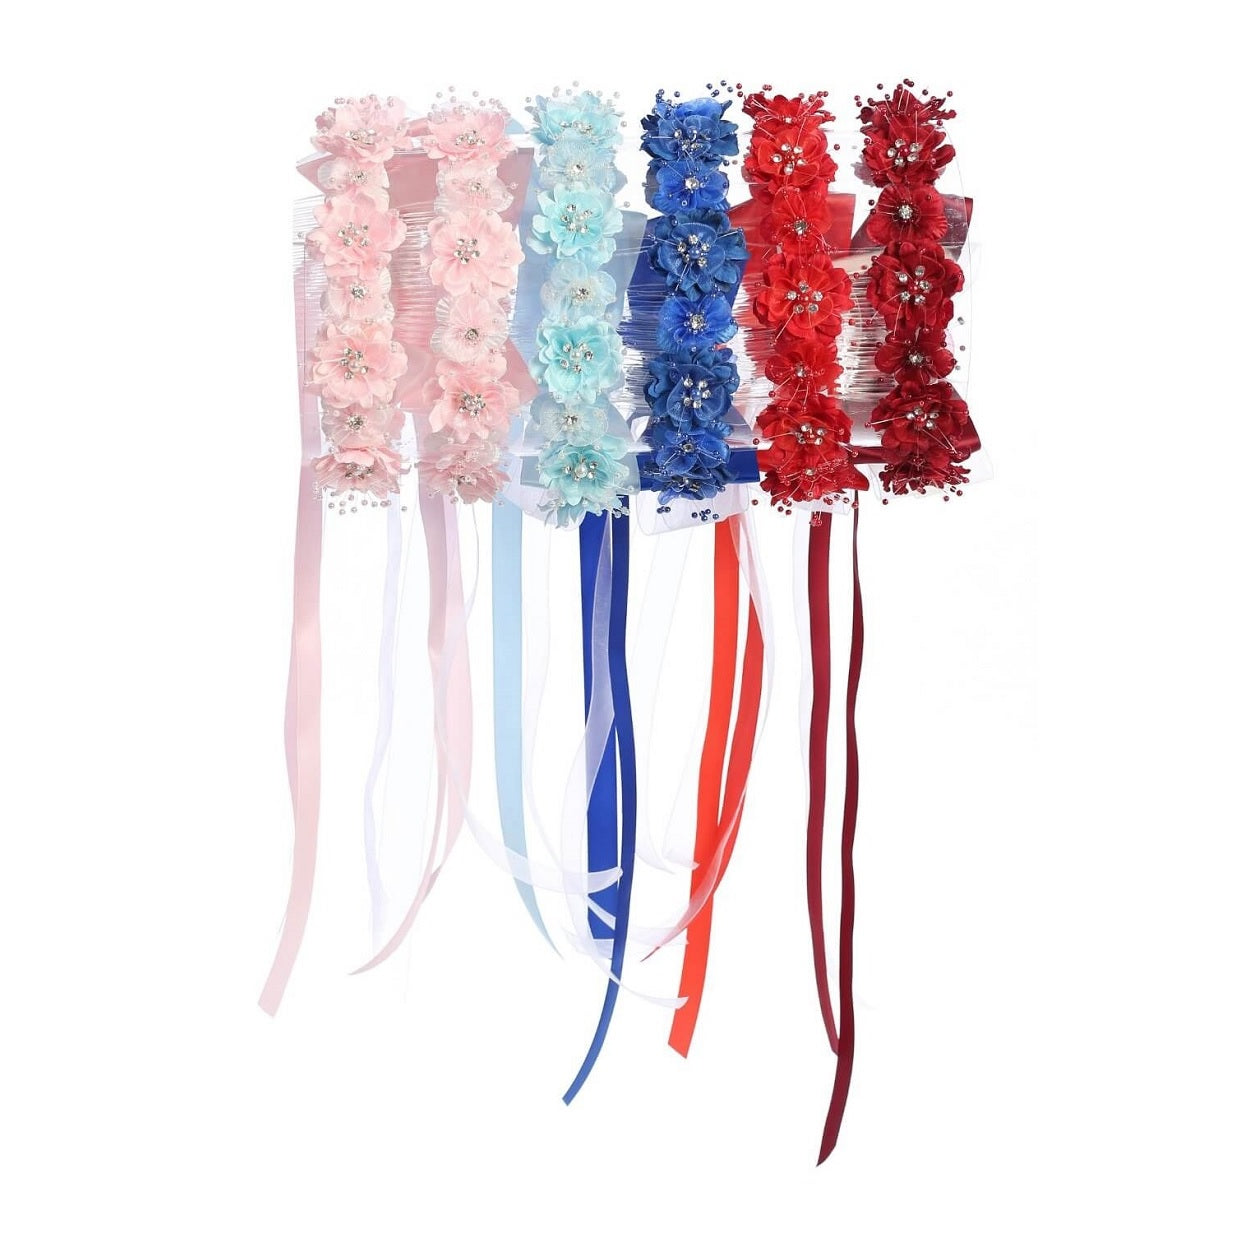 Fabric flower garlands in pink, mint, blue and red